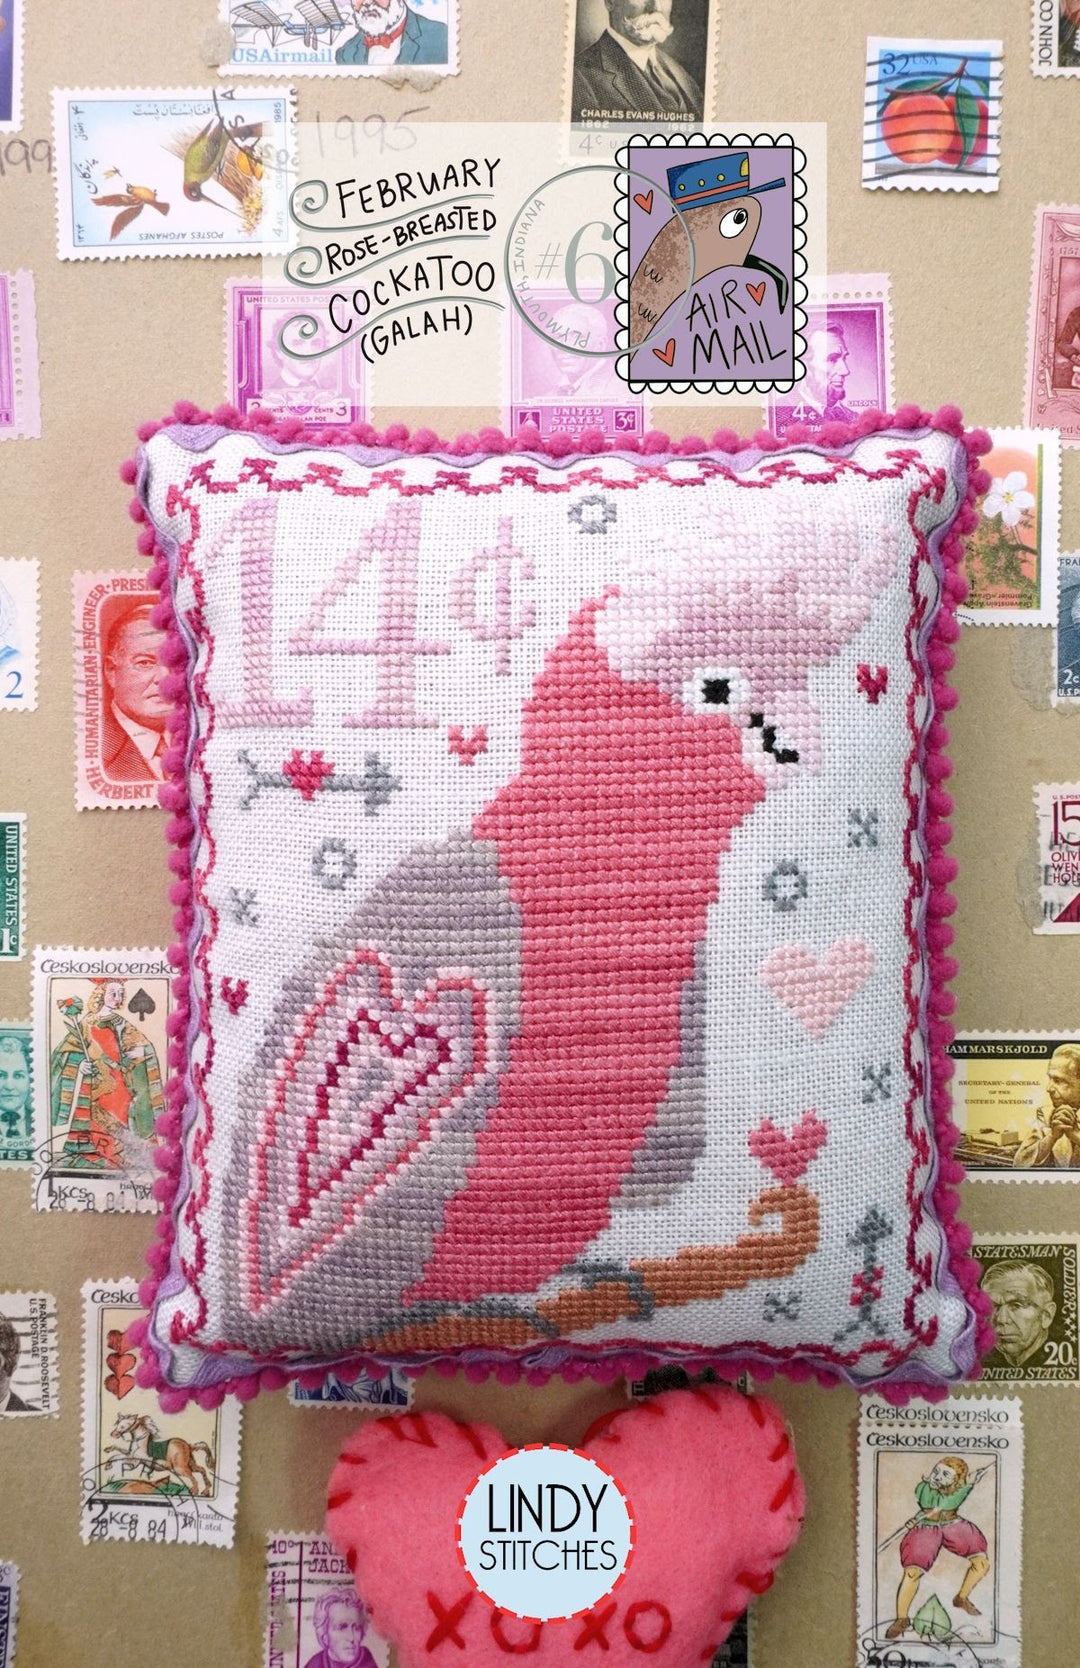 Air Mail February - Rose-Breasted Cockatoo | Lindy Stitches